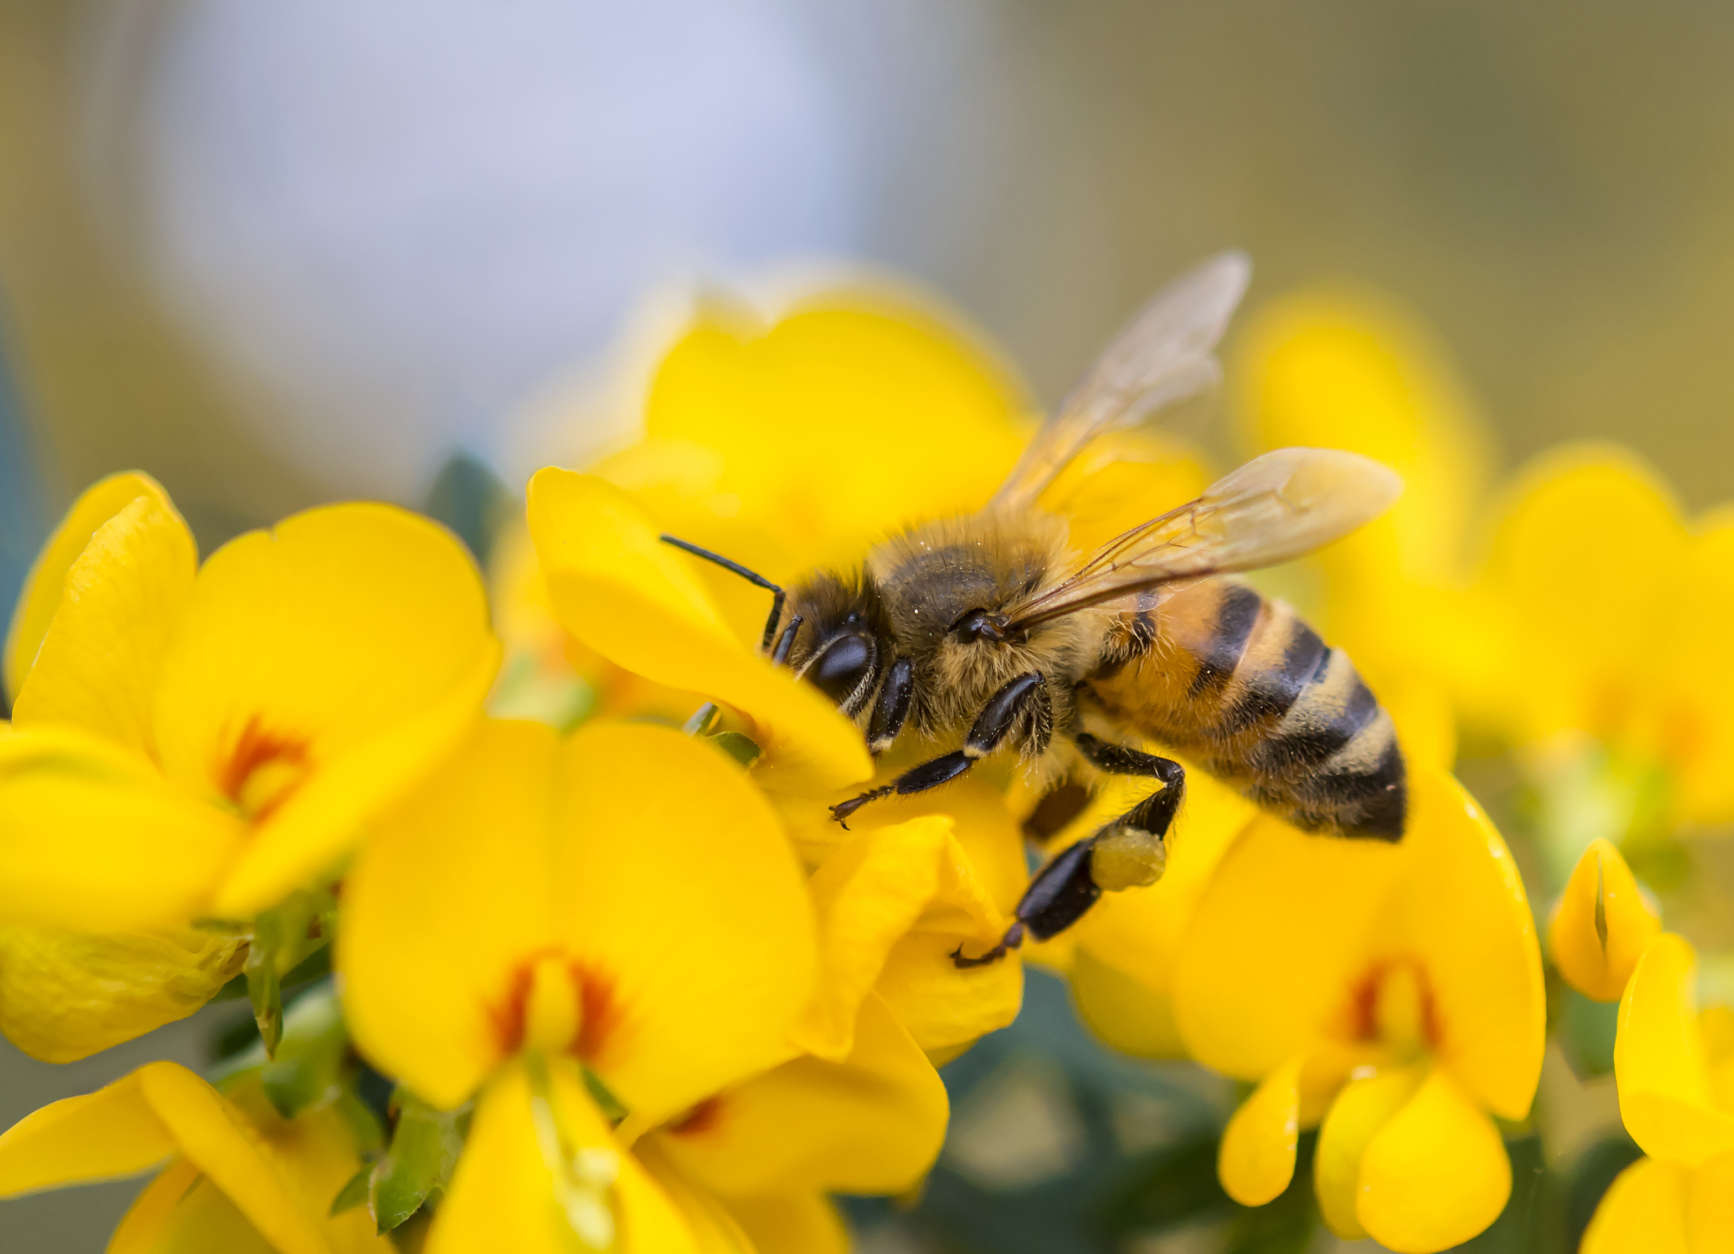 Honeybees, although not native, are incredibly valuable pollinators that are an important link in our food supply. (Getty Images/iStockphoto/RugliG)